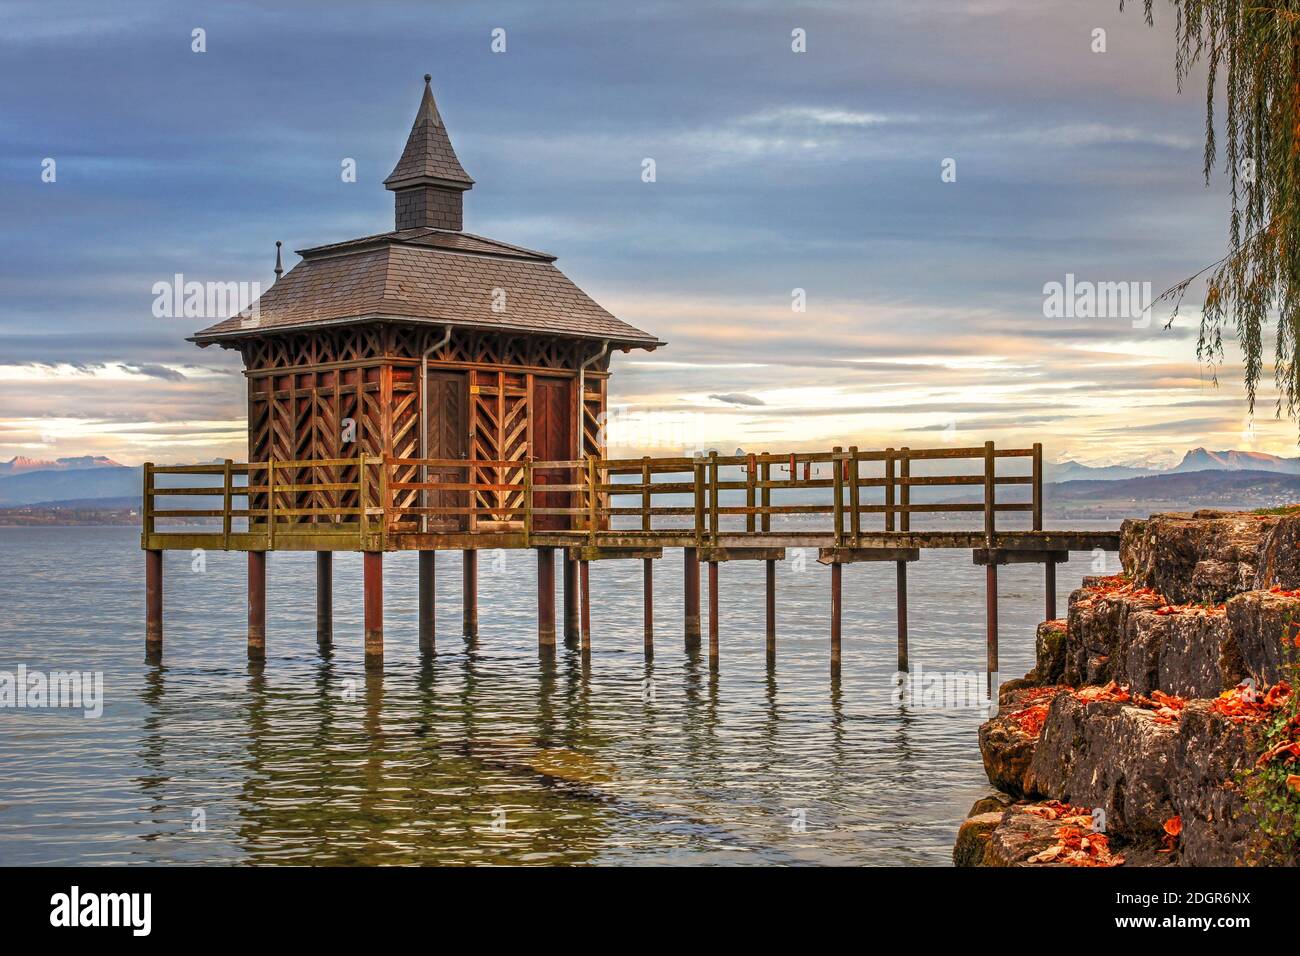 An old structure belonging to the Chateau de Gorgier, the Pavillon des Bains is a charming structure sitting on stilts on the shore of Lake Neuchatel, Stock Photo